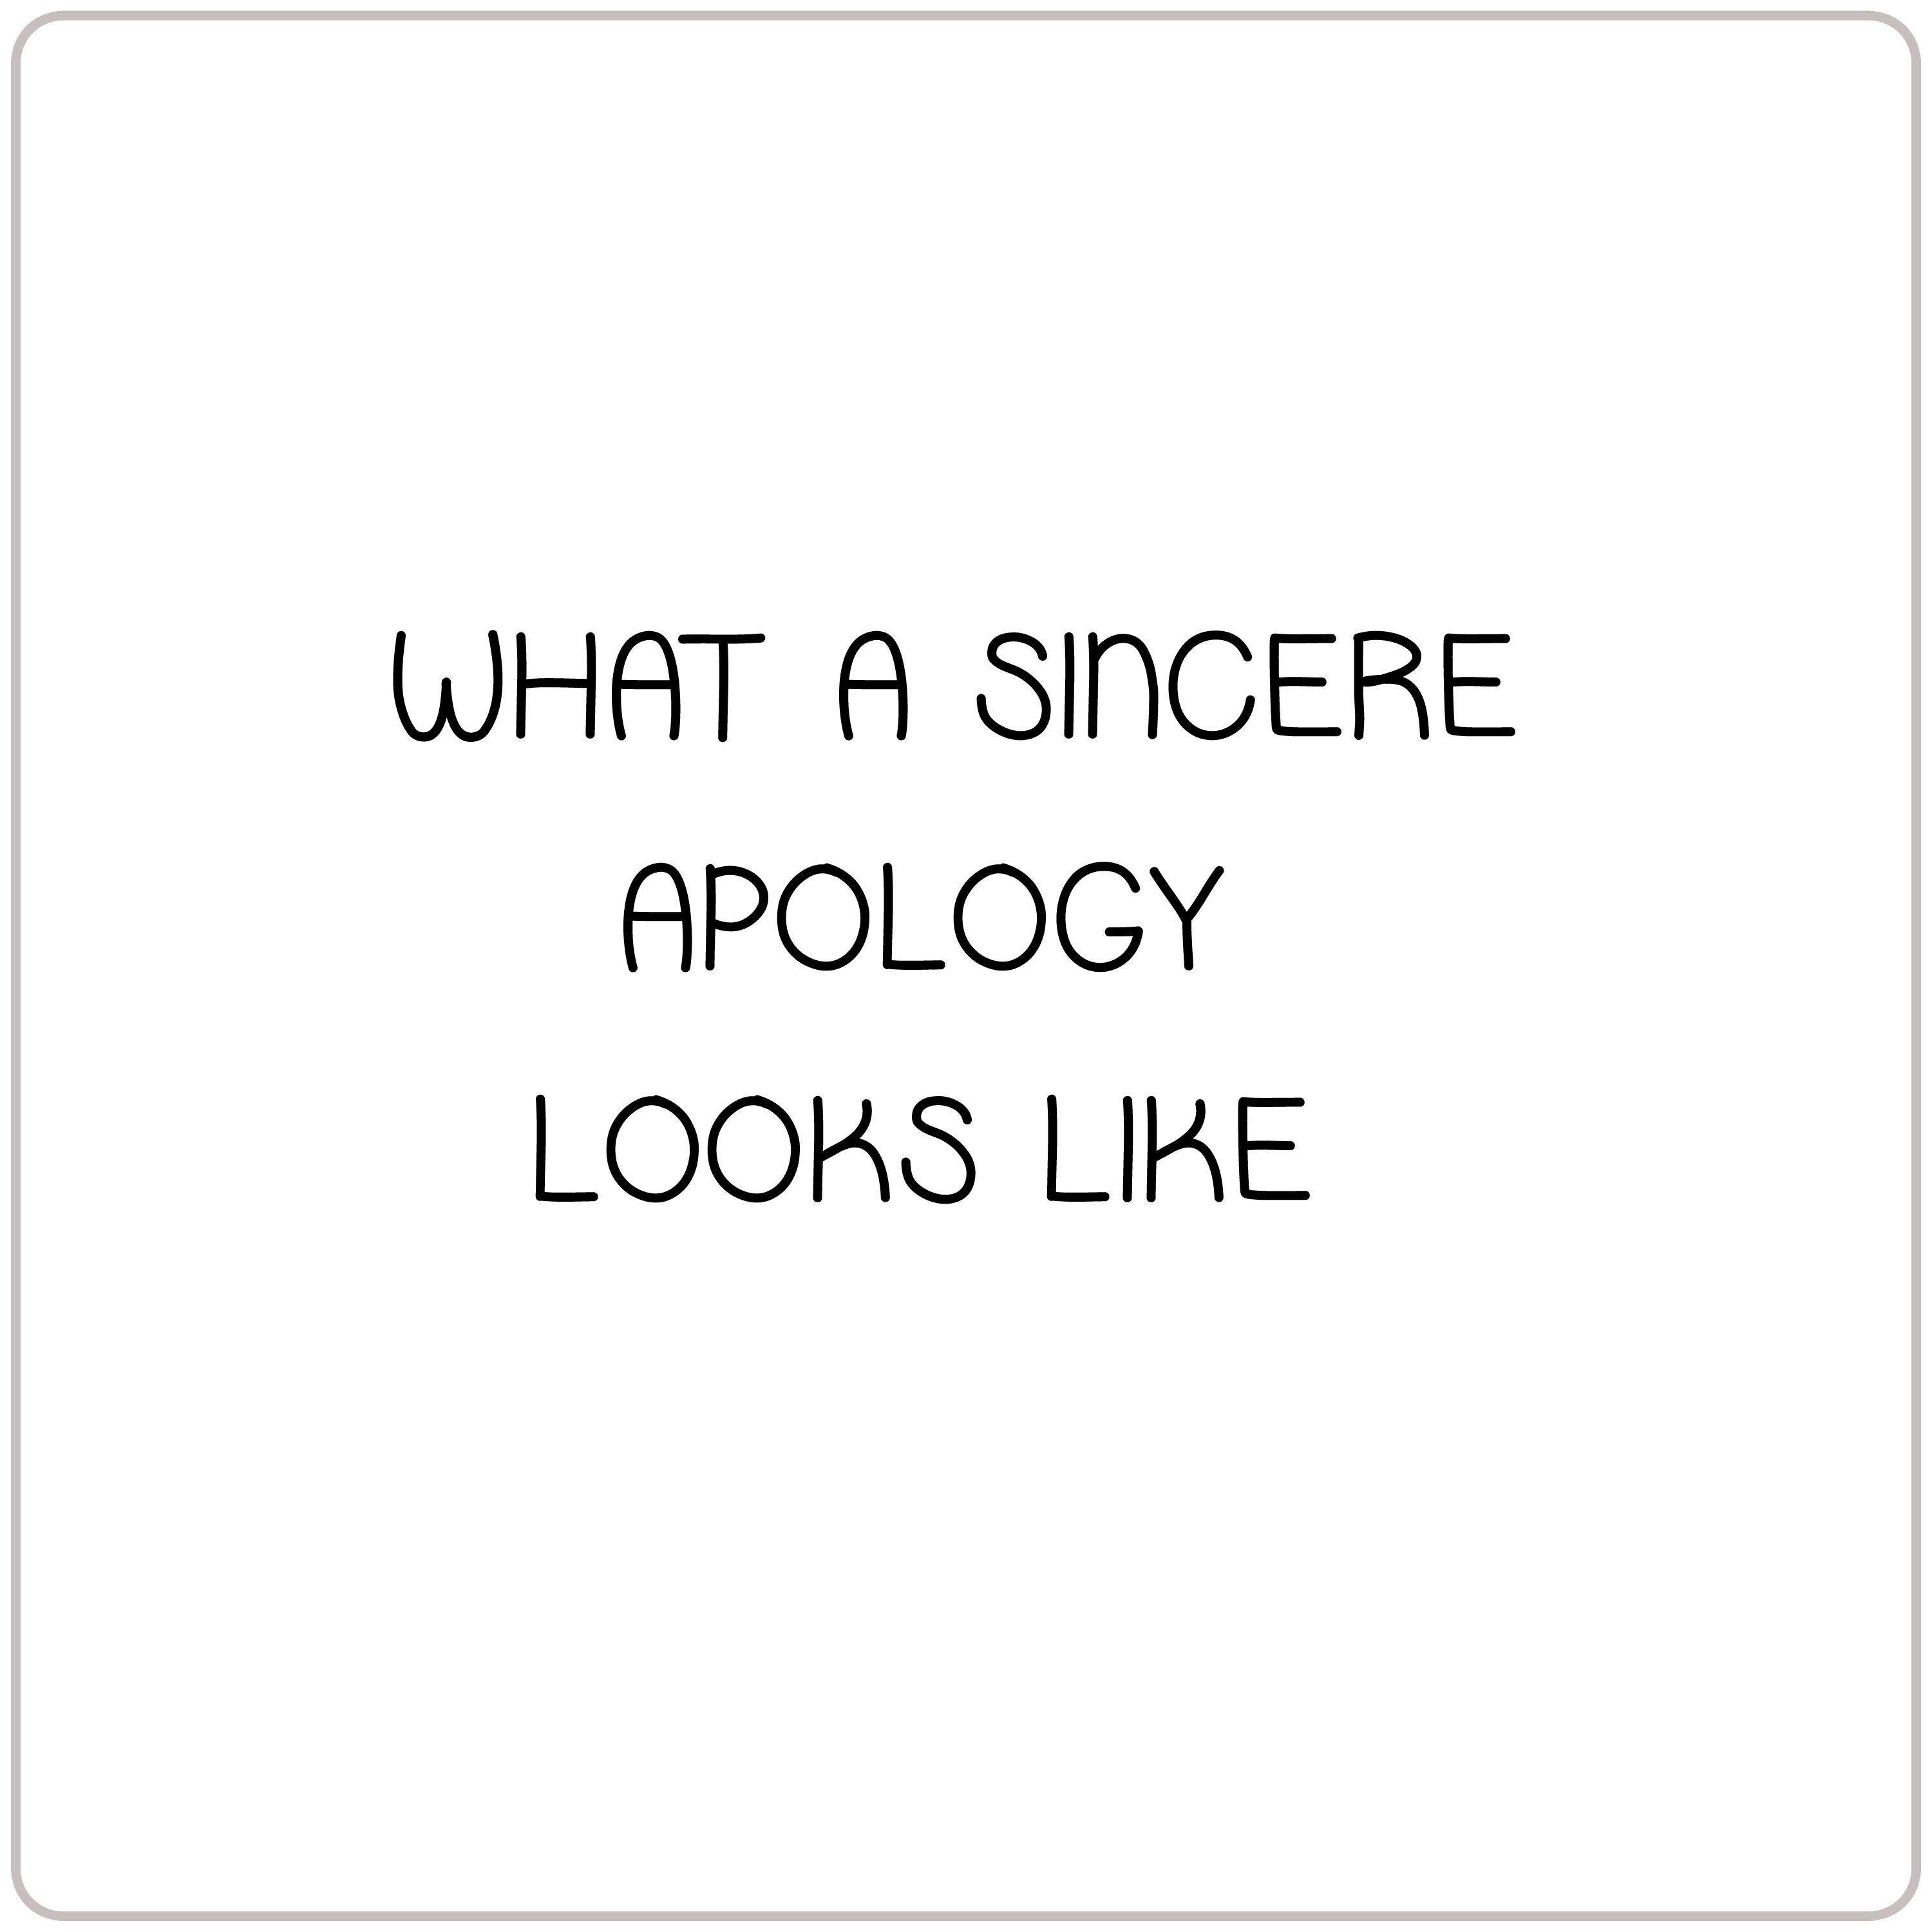 What a sincere apology looks like